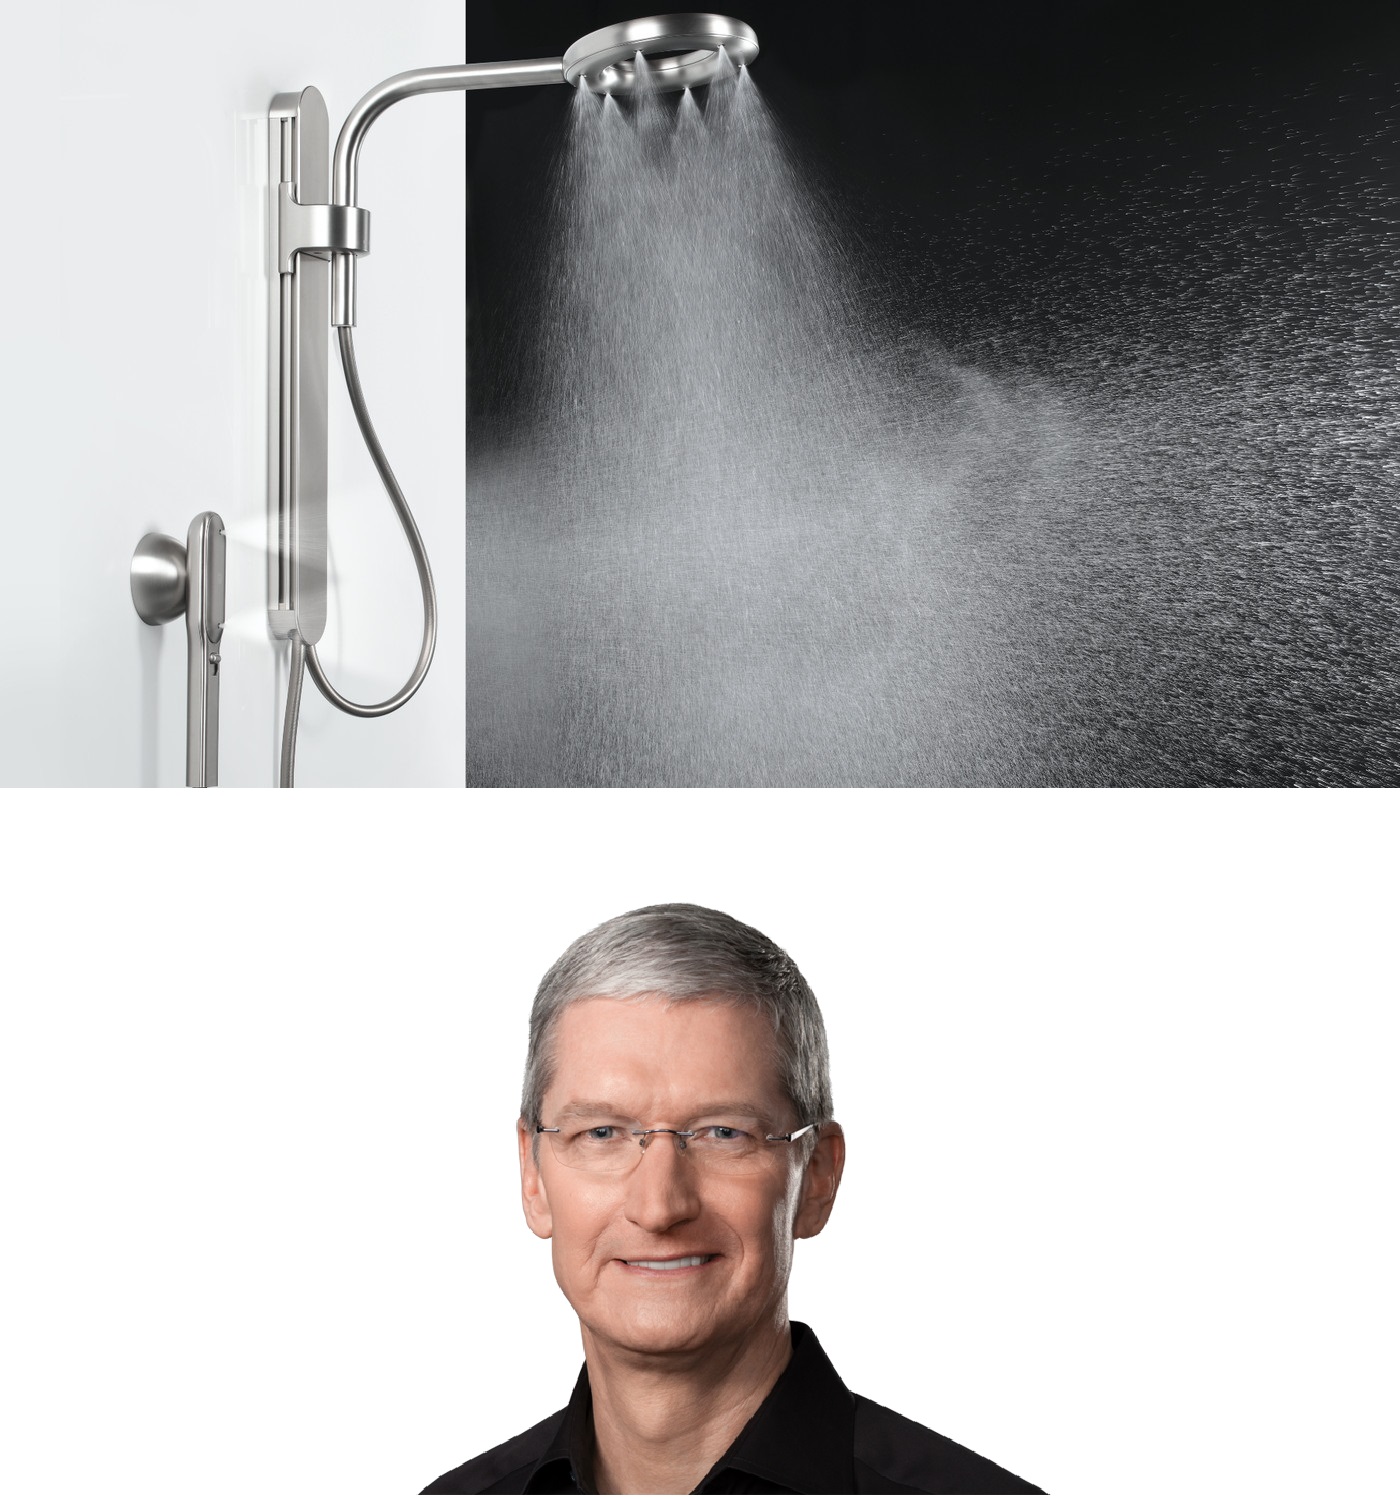 Why There Is No Apple Logo On Tim Cook’s Only Product Without The Brand’s Signature